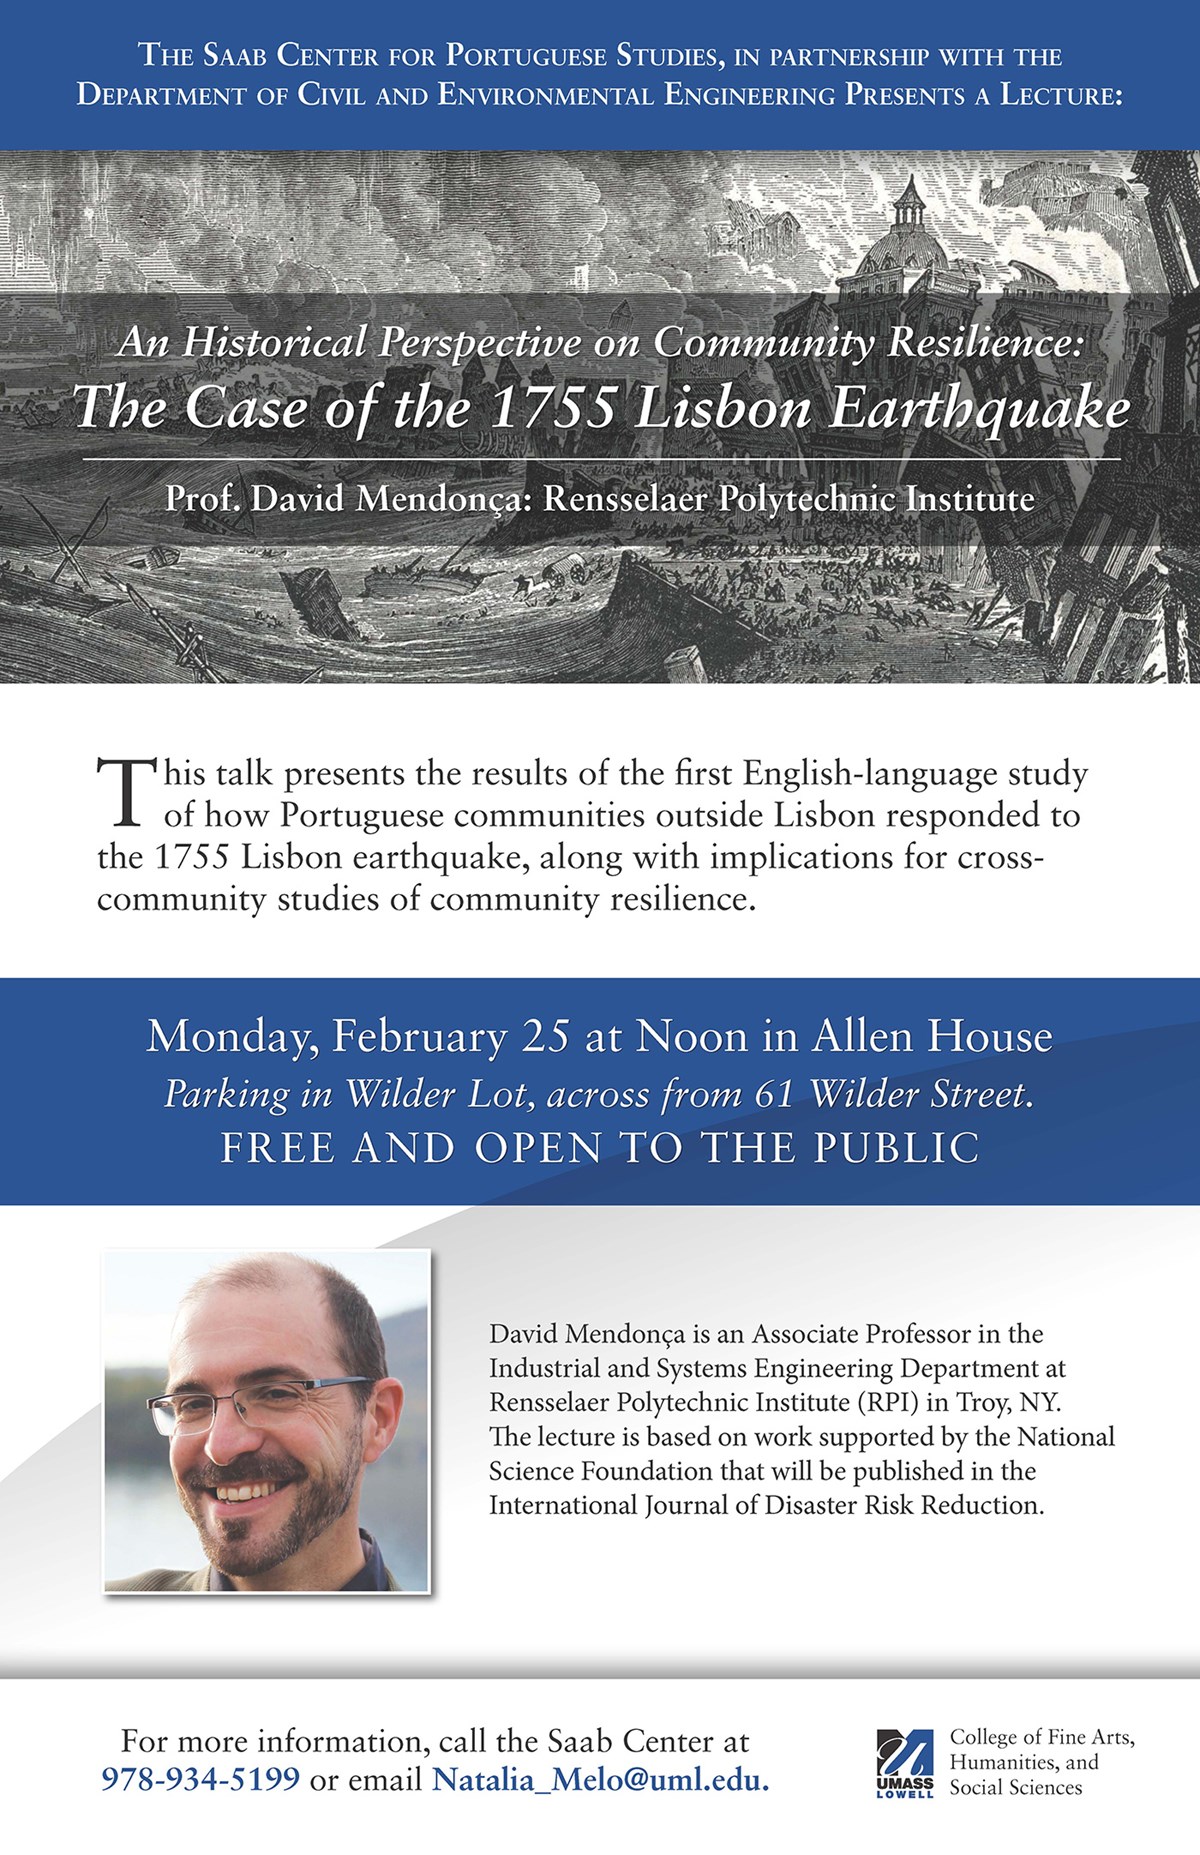 Poster for The Case of the 1755 Lisbon Earthquake Lecture - An Historical Perspective on Community Resilience: The Case of the 1755 Lisbon Earthquake by Prof. David Mendonça: Rensselaer Polytechnic Institute on Monday, February 25, 2019 at Noon at UMass Lowell's Allen House.